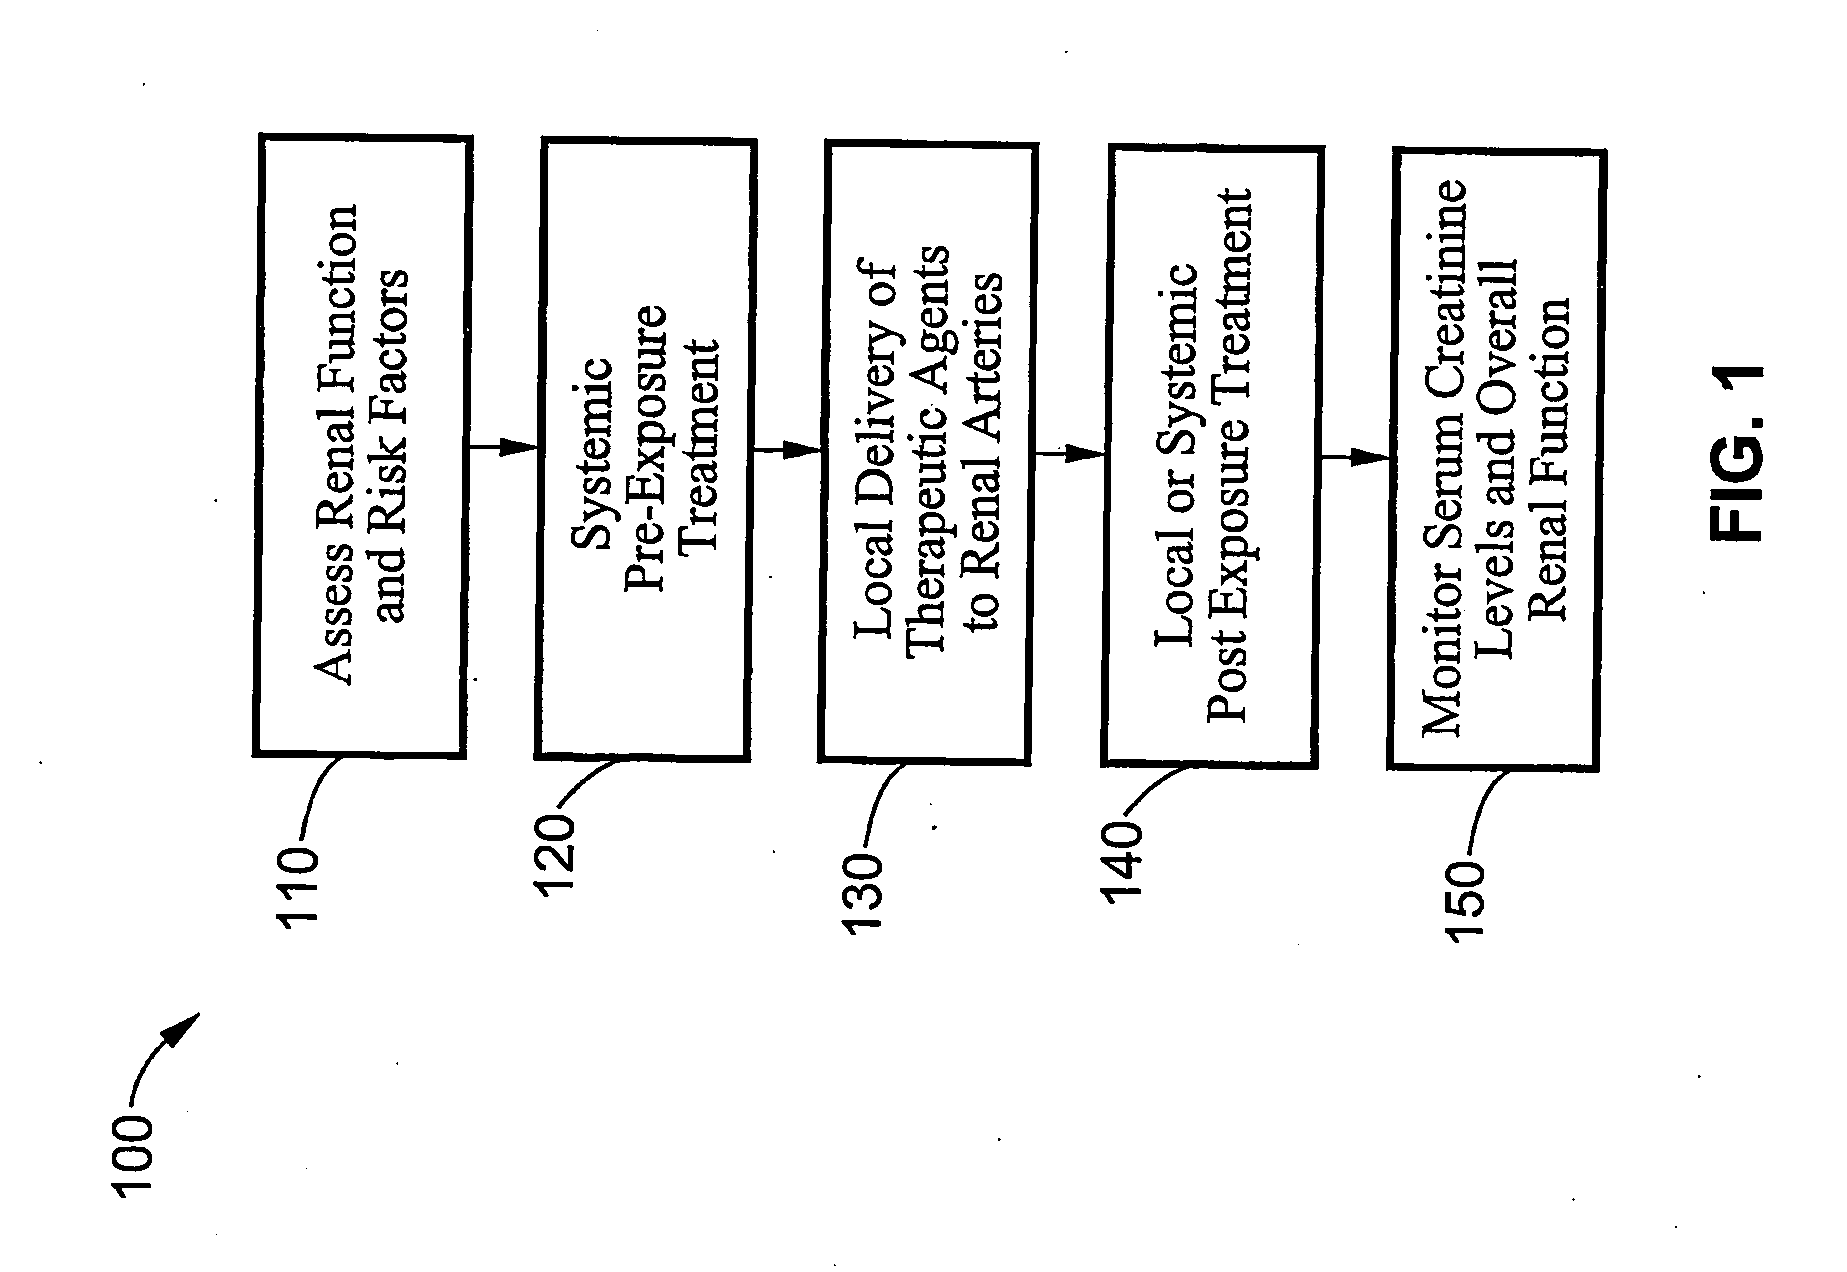 System and method for prevention of radiocontrast induced nephropathy